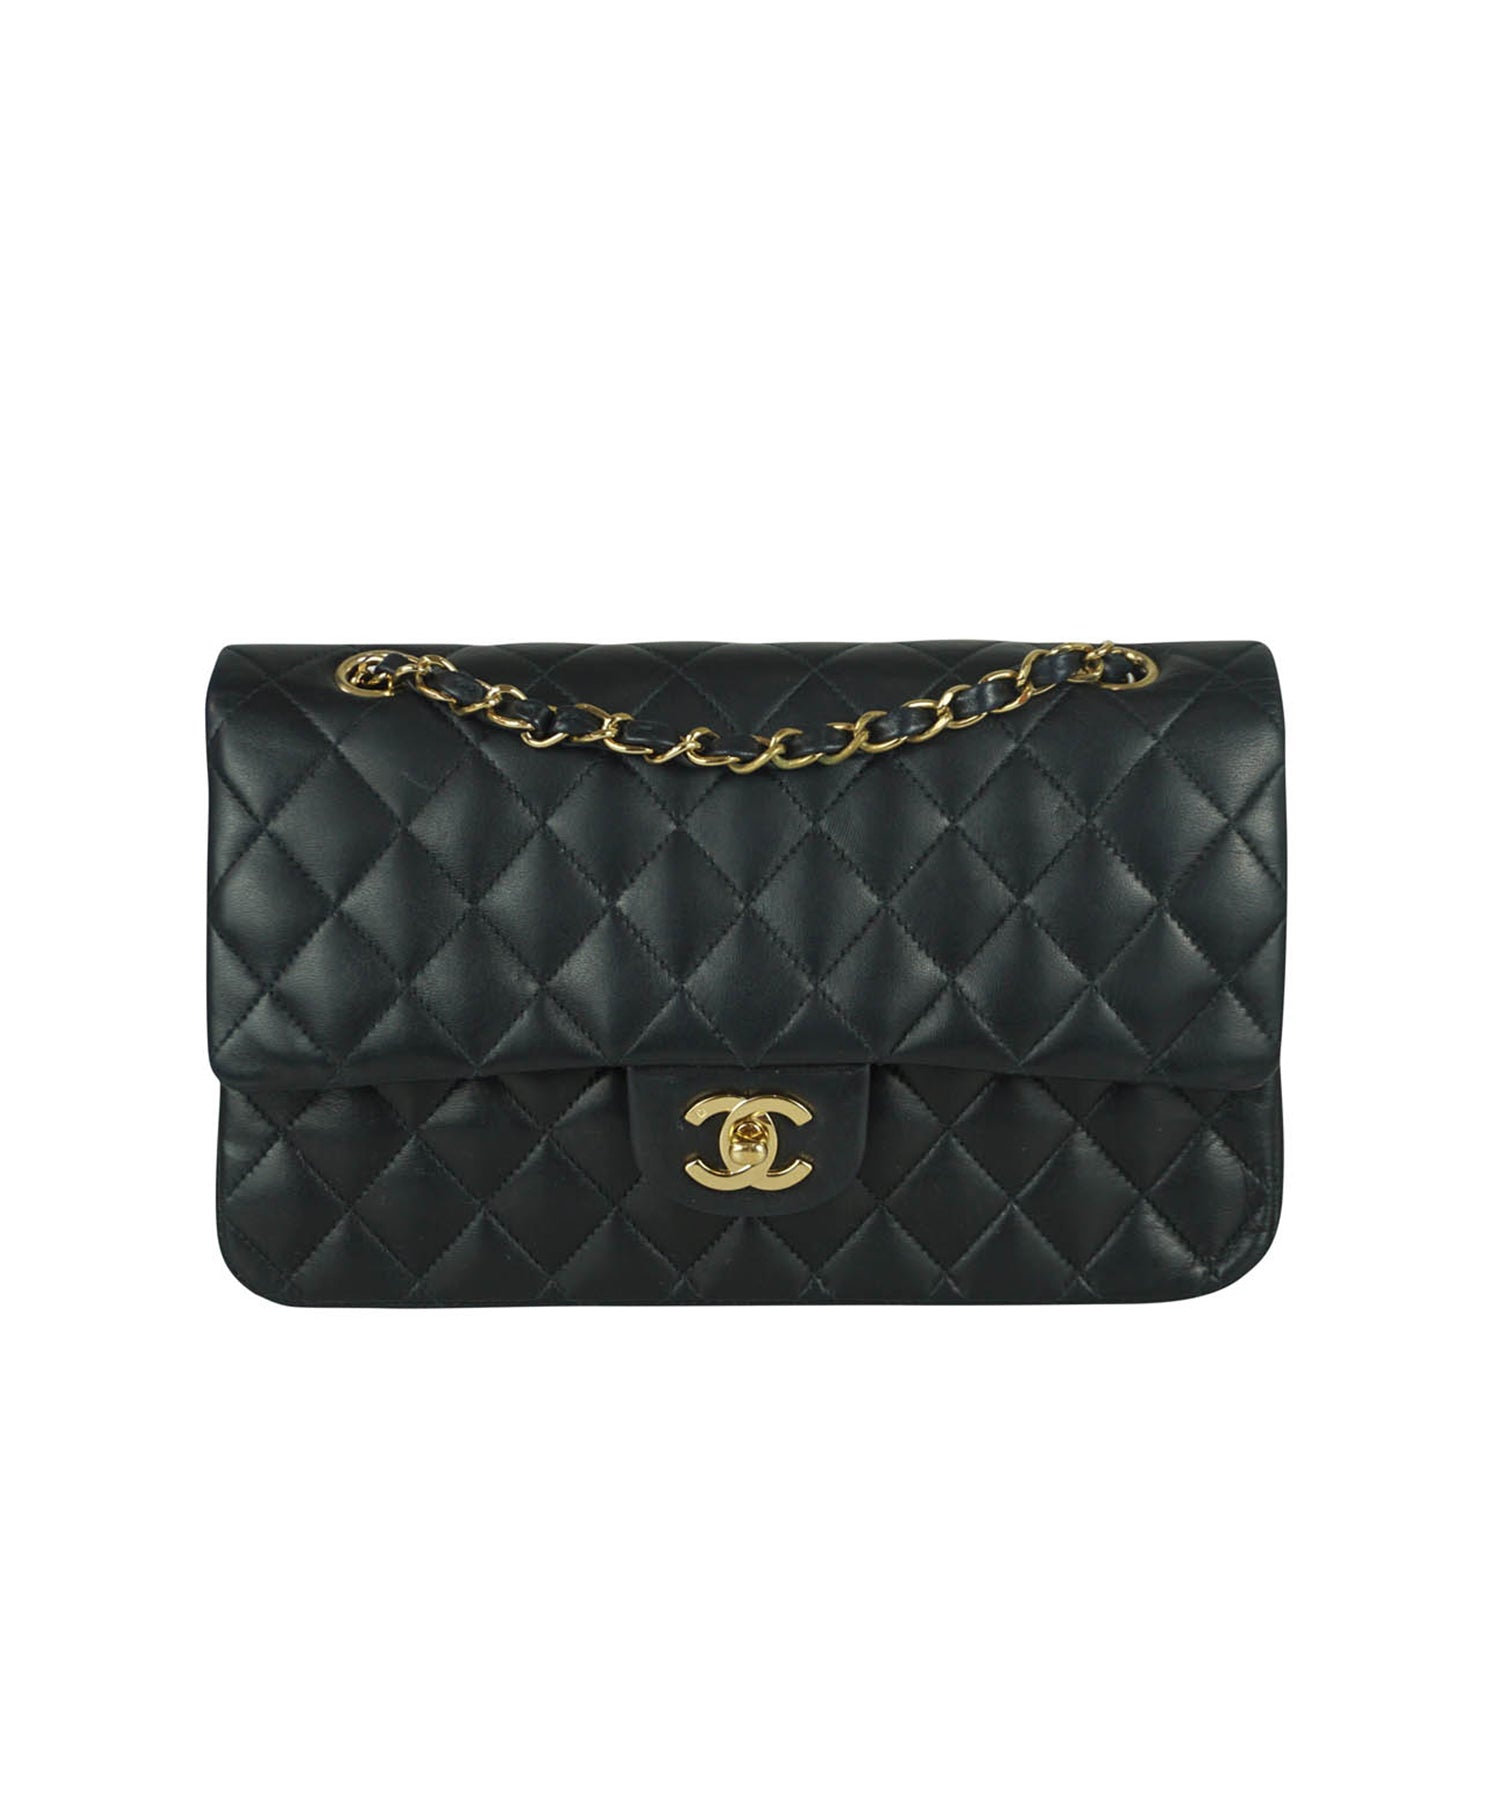 Vintage CHANEL CC Logo Black Patent Leather Quilted Crossbody